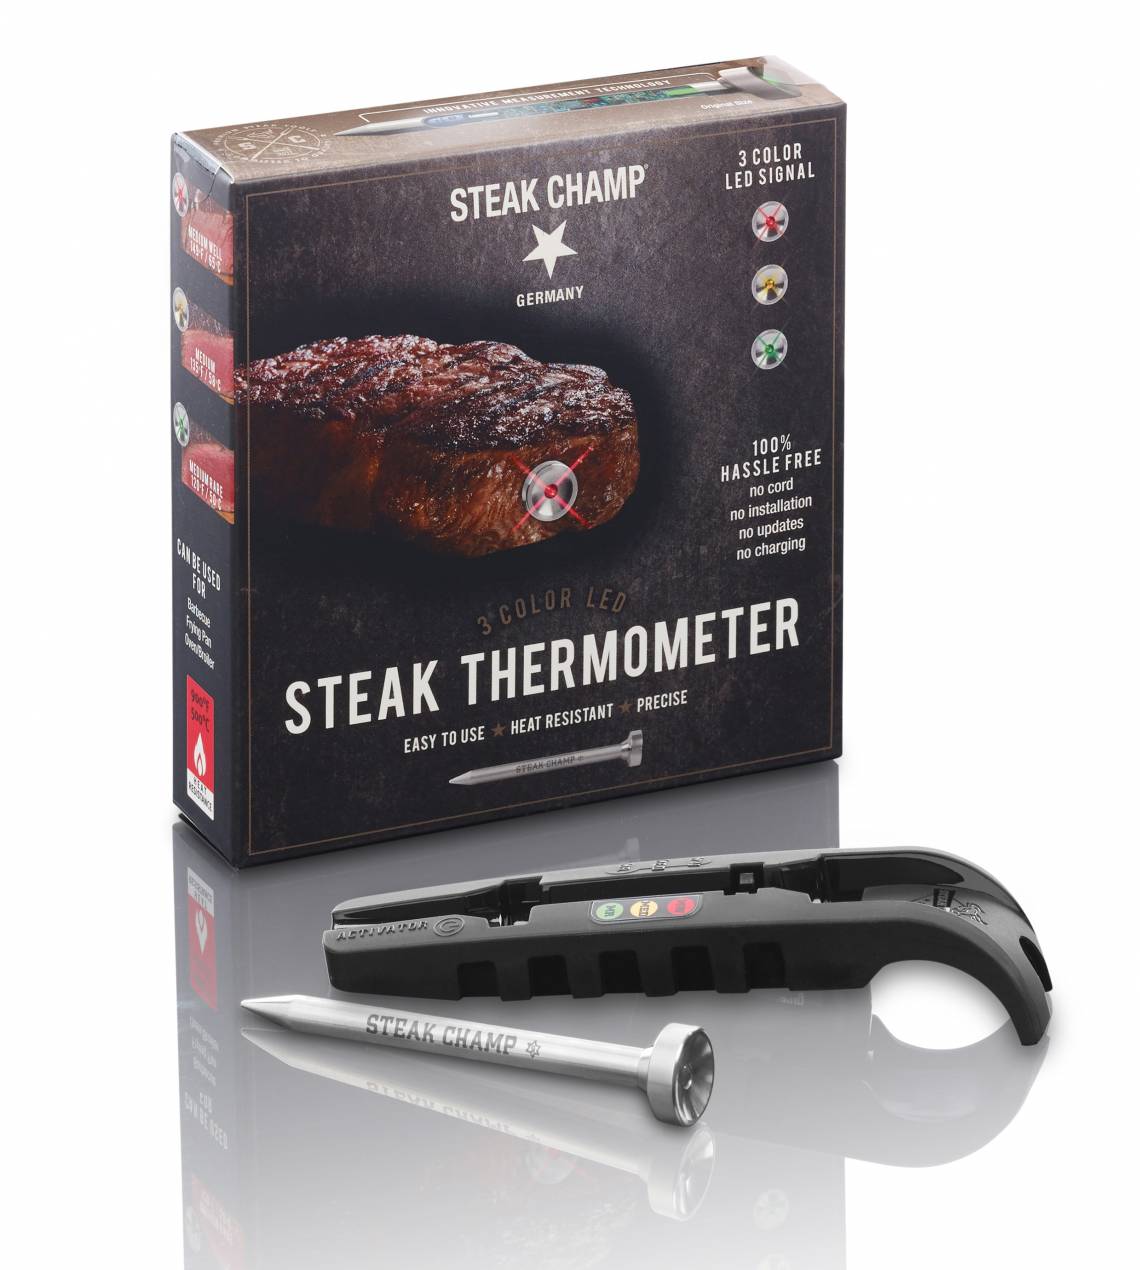 Steak Champ 3-Color black Thermometer und Verpackung